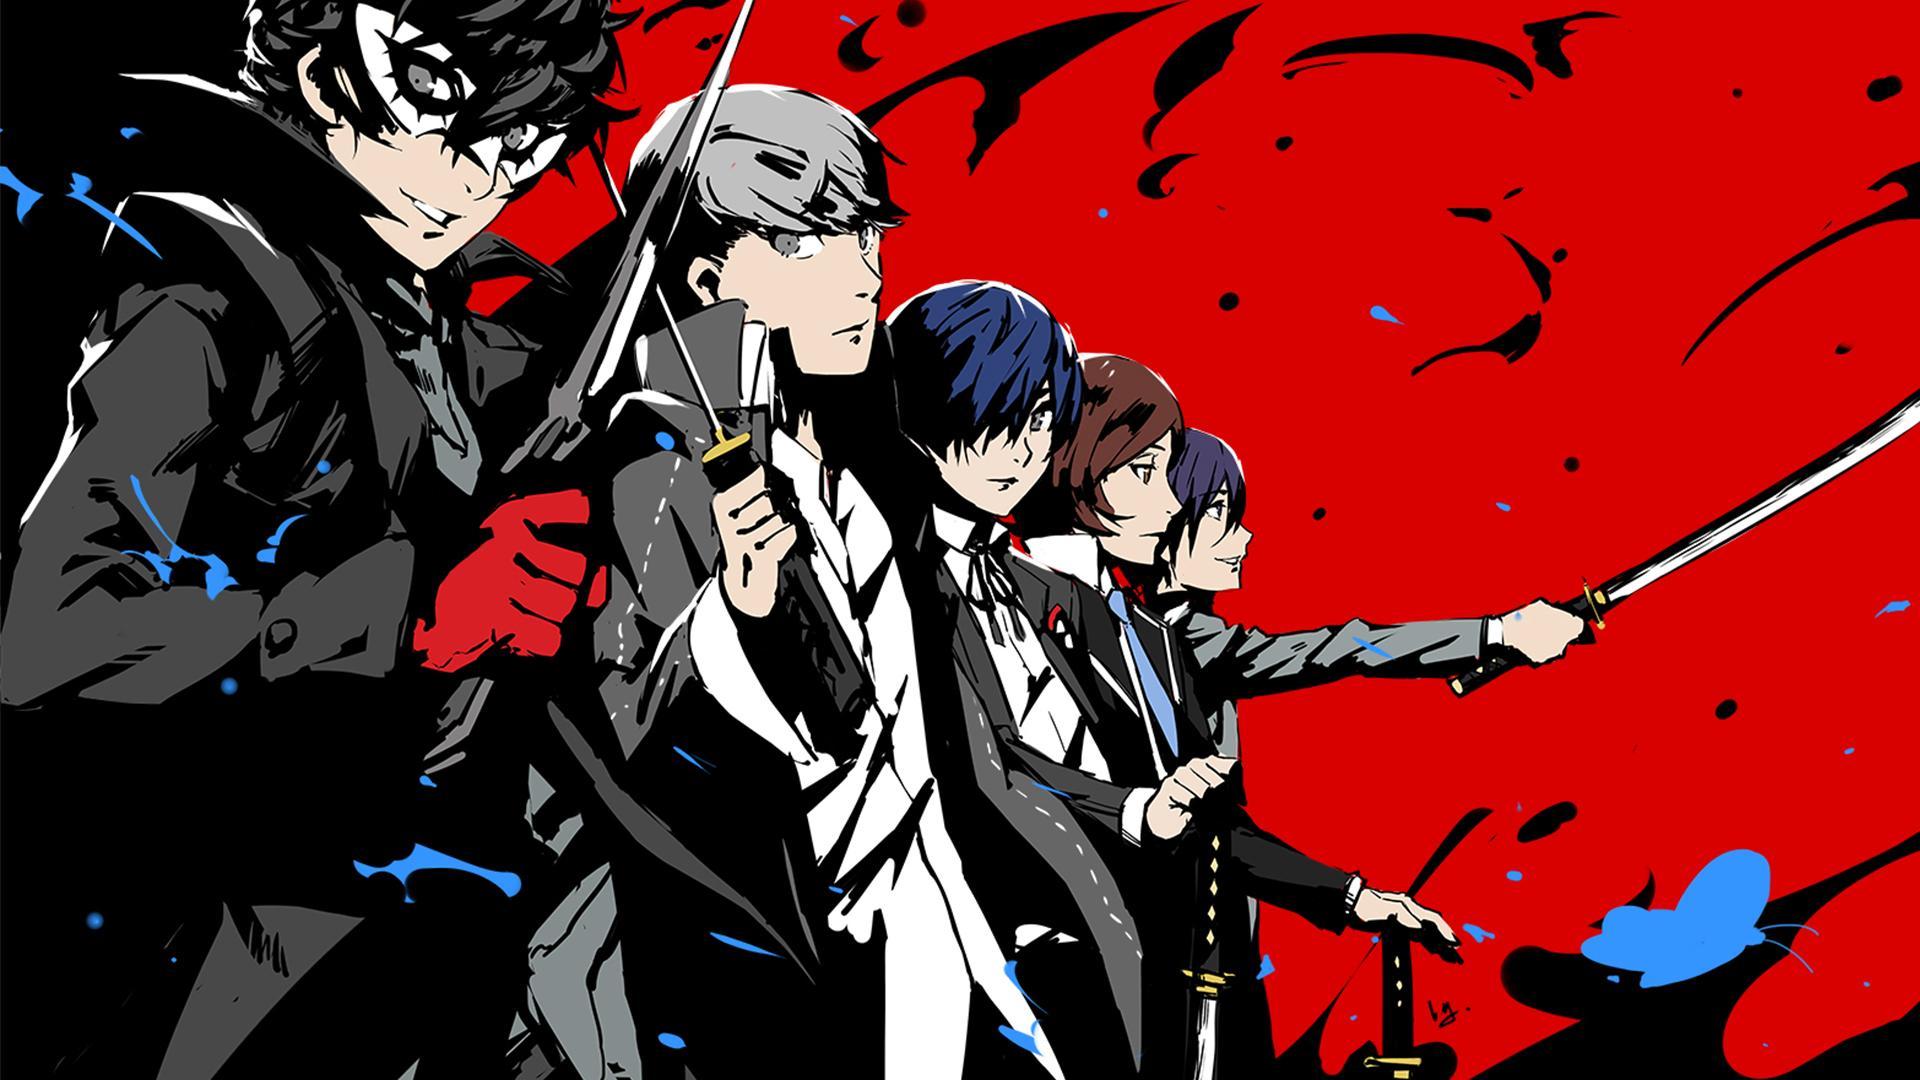 Stunning Persona 5 Wallpaper image For Free Download